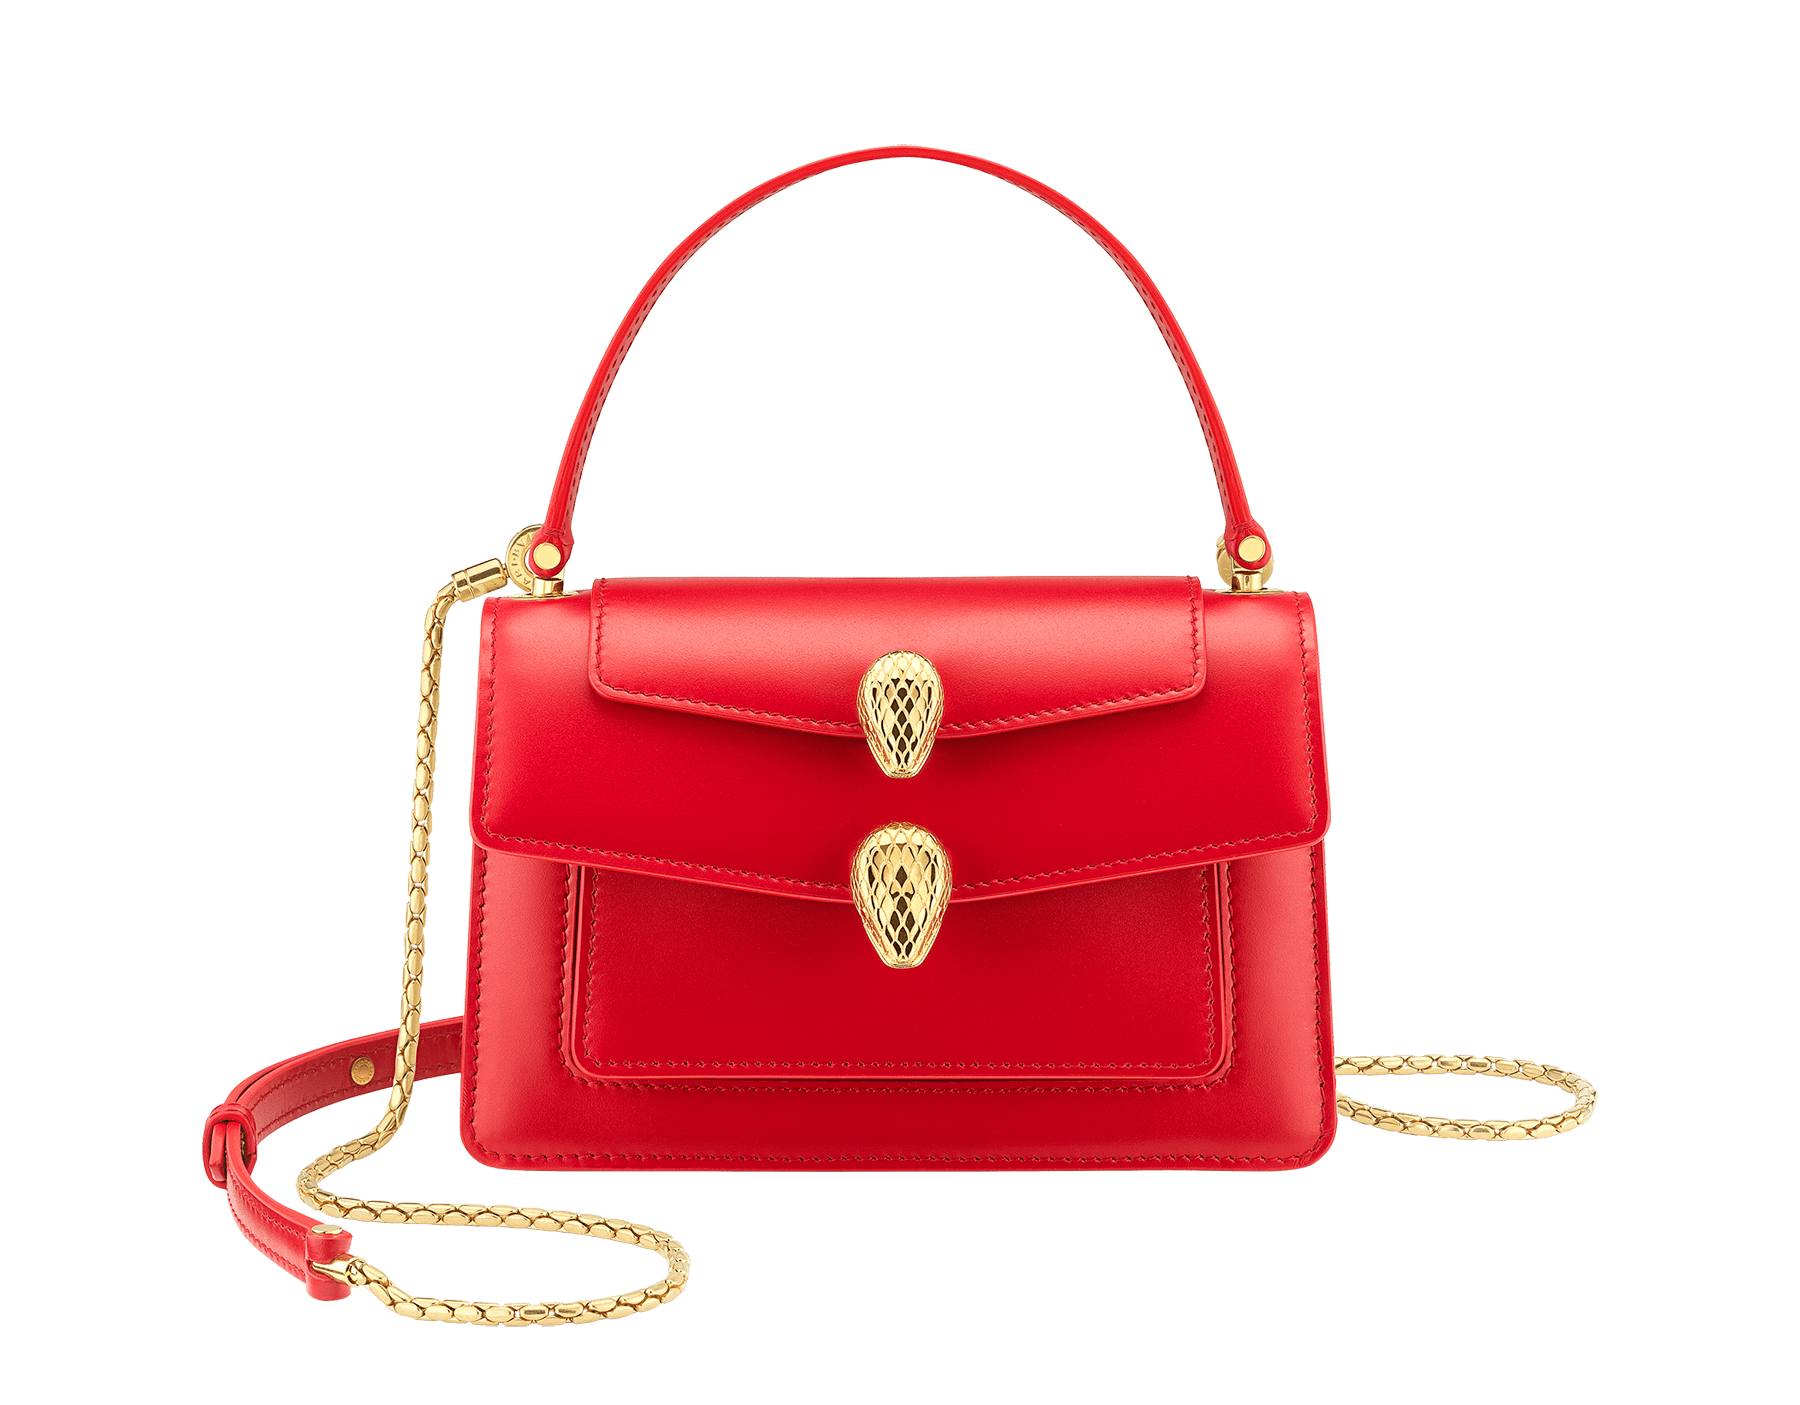 "Alexander Wang x Bvlgari" belt bag in smooth Amaranth Garnet red calfskin. New double Serpenti head closure in antique gold-plated brass with alluring red enamel eyes. SFW-001-1029S image 1